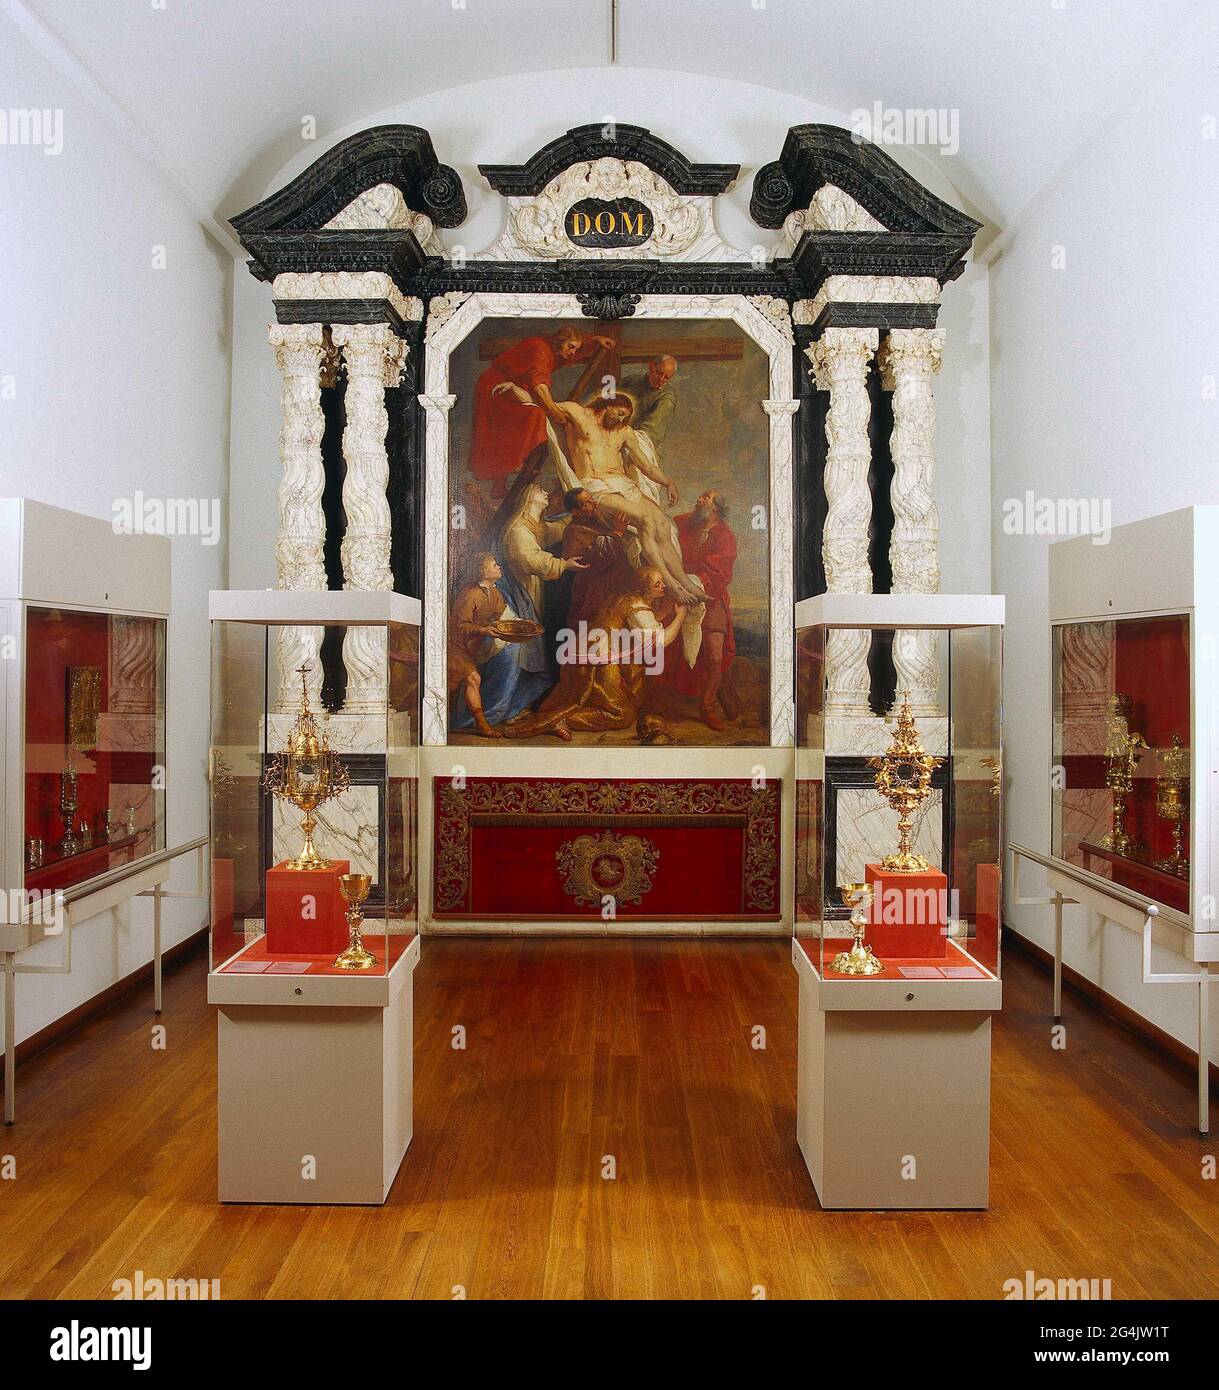 . Head frame of an altar of oak with an open midfield, refreshed side walls and a broken frontone as a crowning. The frame of the open center compartment is formed by two pilasters with candidaber ornament, which support a five-side bow frame (egg list) with a shell pattern in the middle and cherubs in the swing. The side walls are structured as follows: on a podestal with simple profiled flat panels rest on a 21 cm high square plinth two low rectangular baseboards, on each of which a pilaster with a twisted column with composite capital. The drums of the shaft are varied alternately and decor Stock Photo